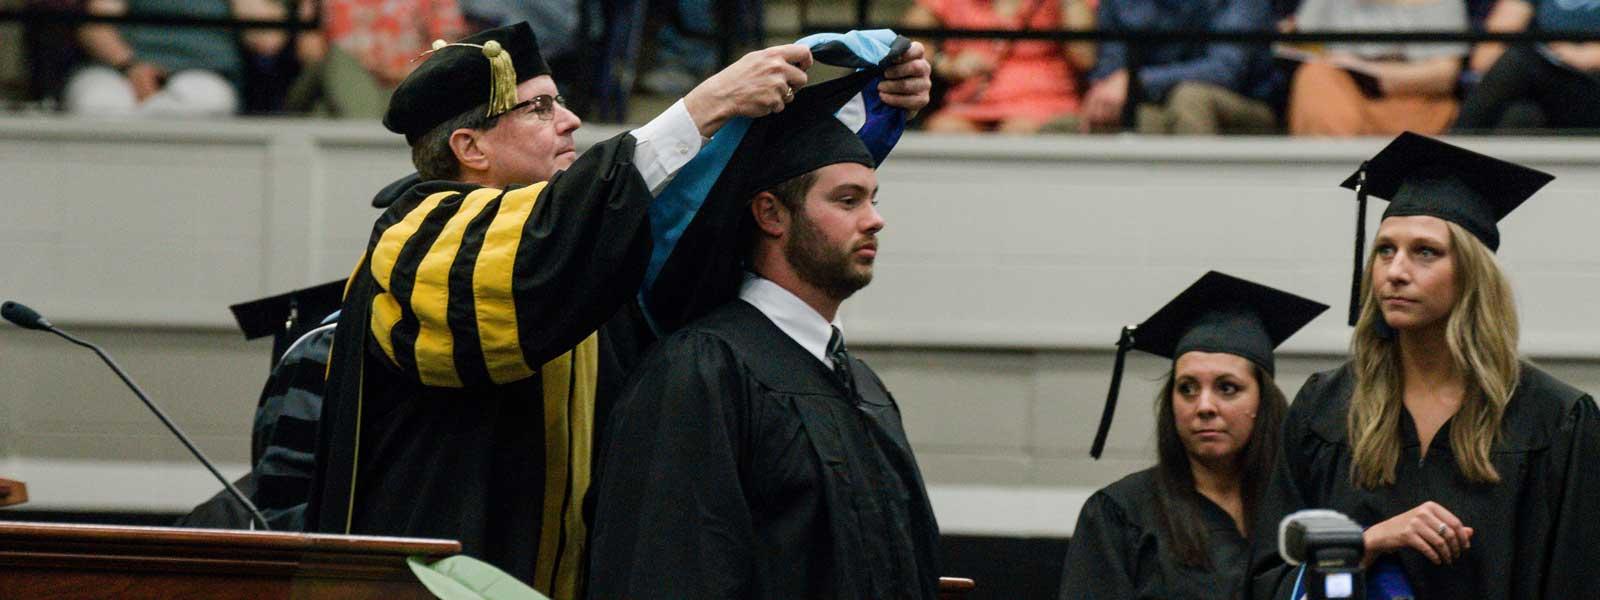 college dean put hoods around neck of graduate while other graduates watch and wait their turns